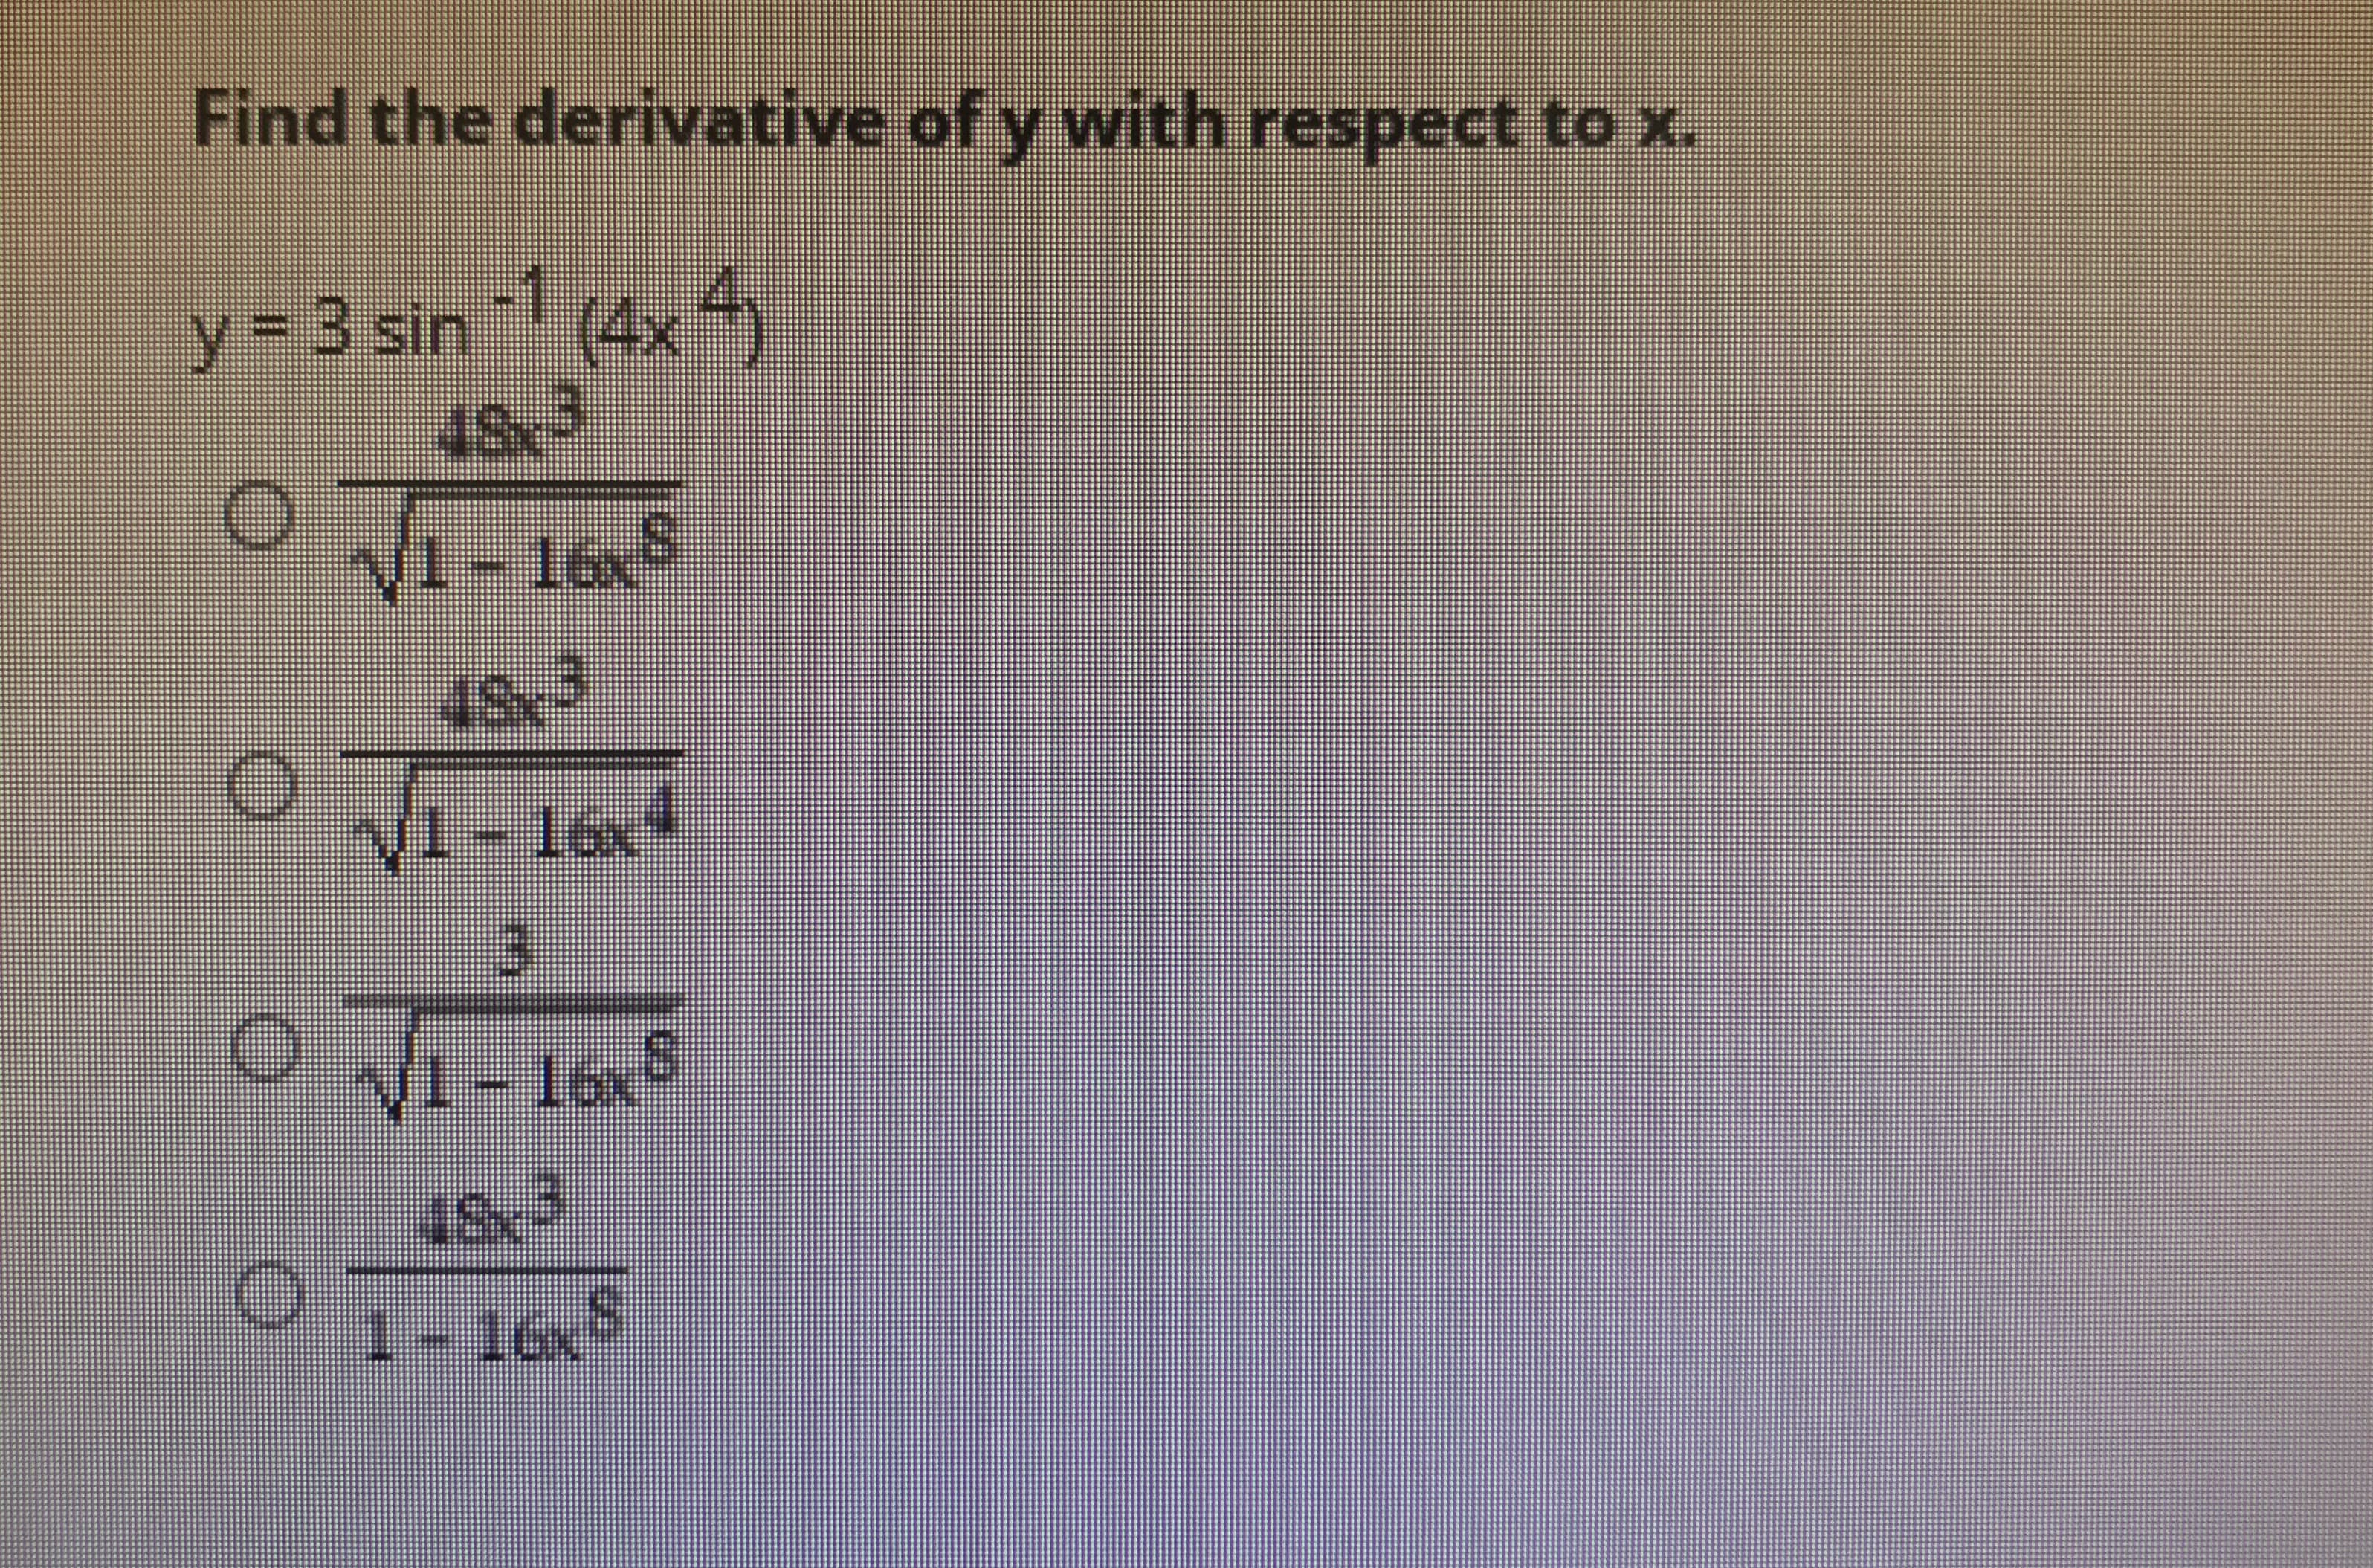 Find the derivative of y with respect to x.
y = 3 sin 1 (4x 4
